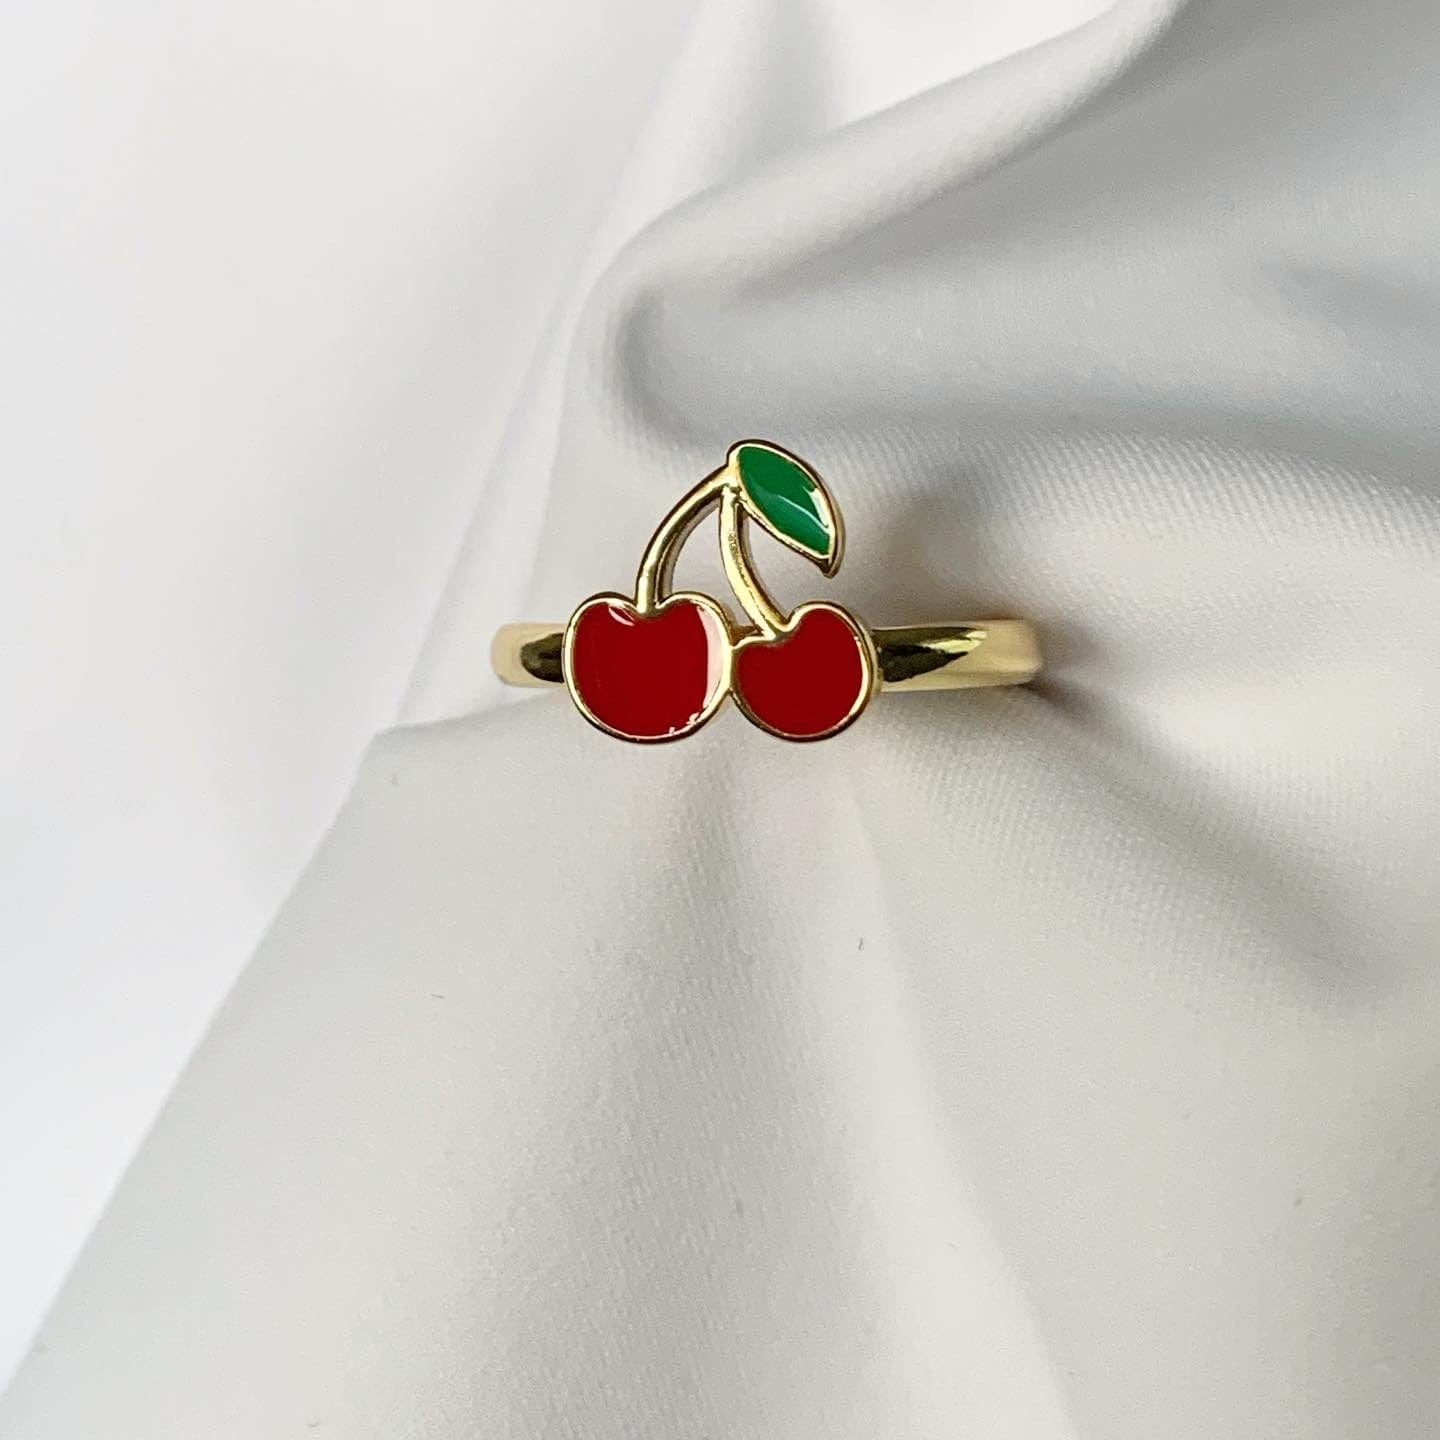 Gold Filled Adjustable Cherry Ring by Jewelers Garden